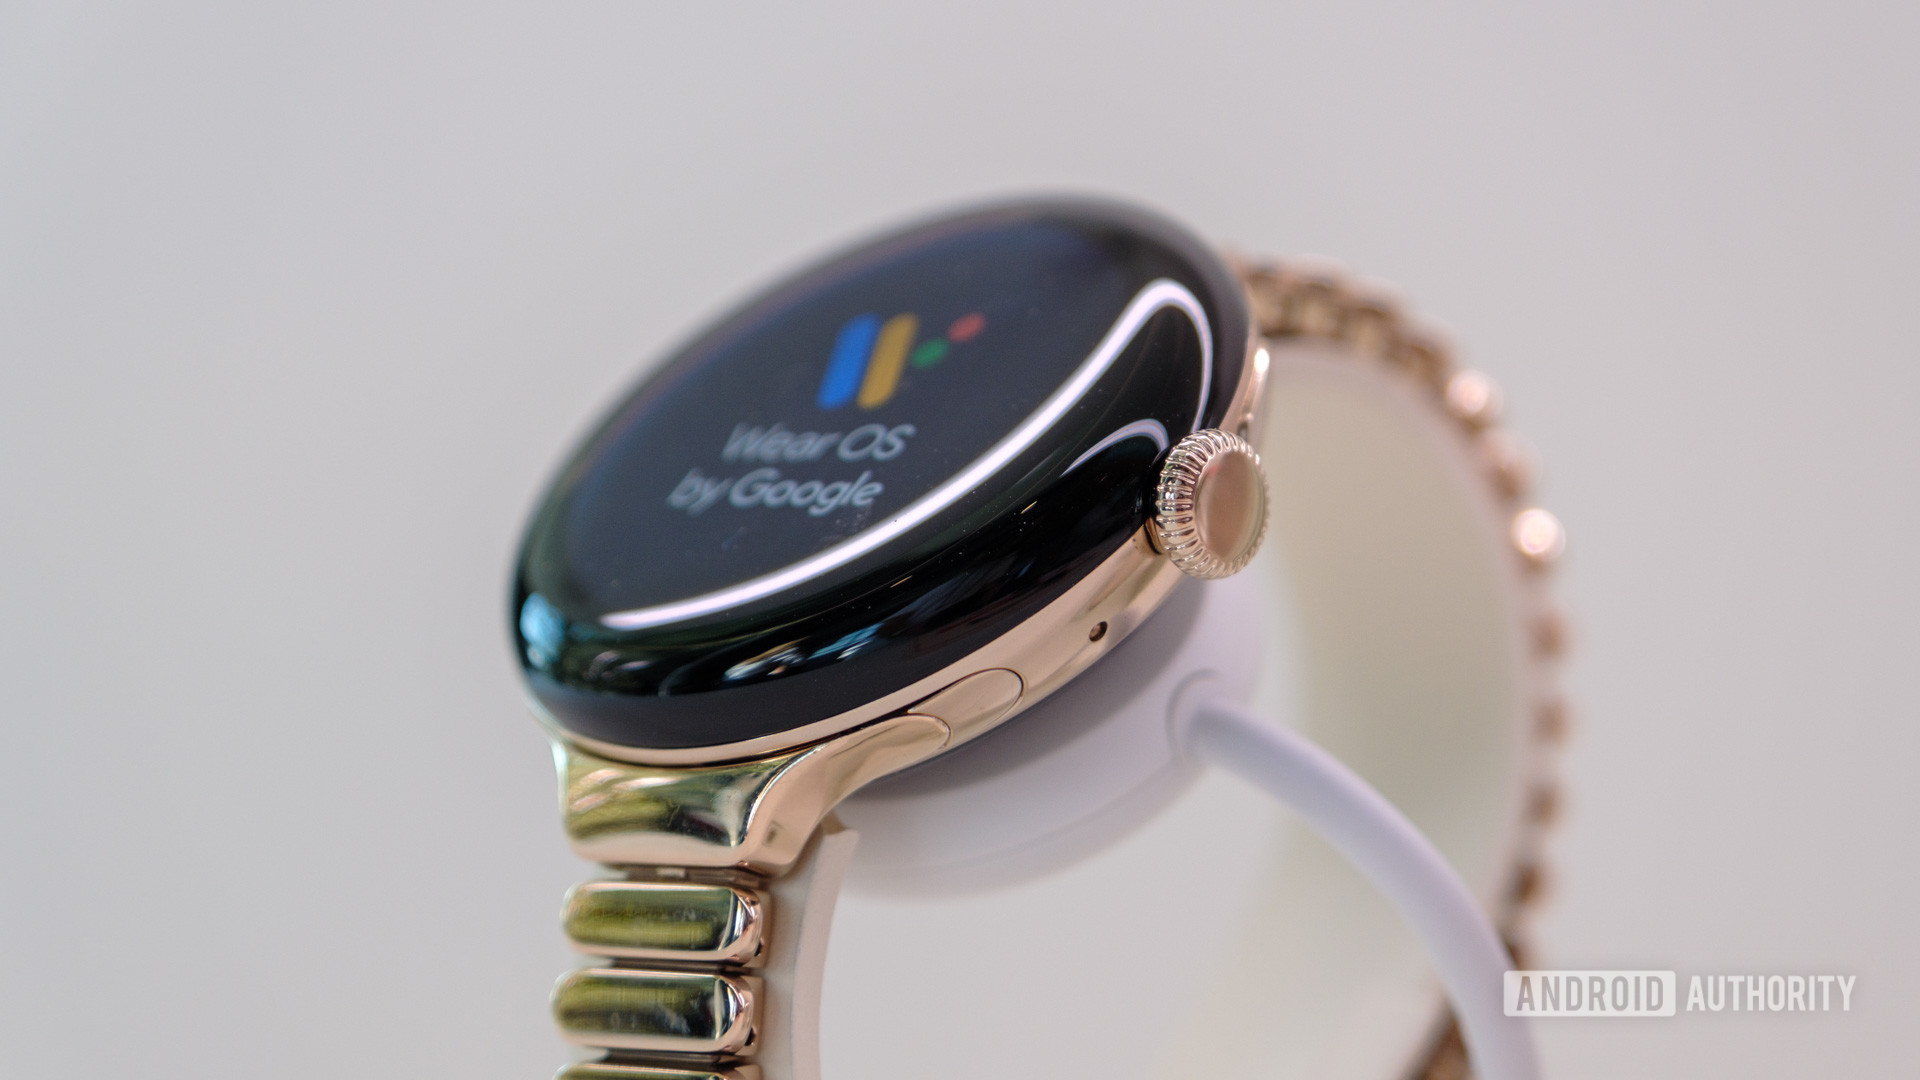 Google Pixel Watch 2: Availability, price, colors, features, and more